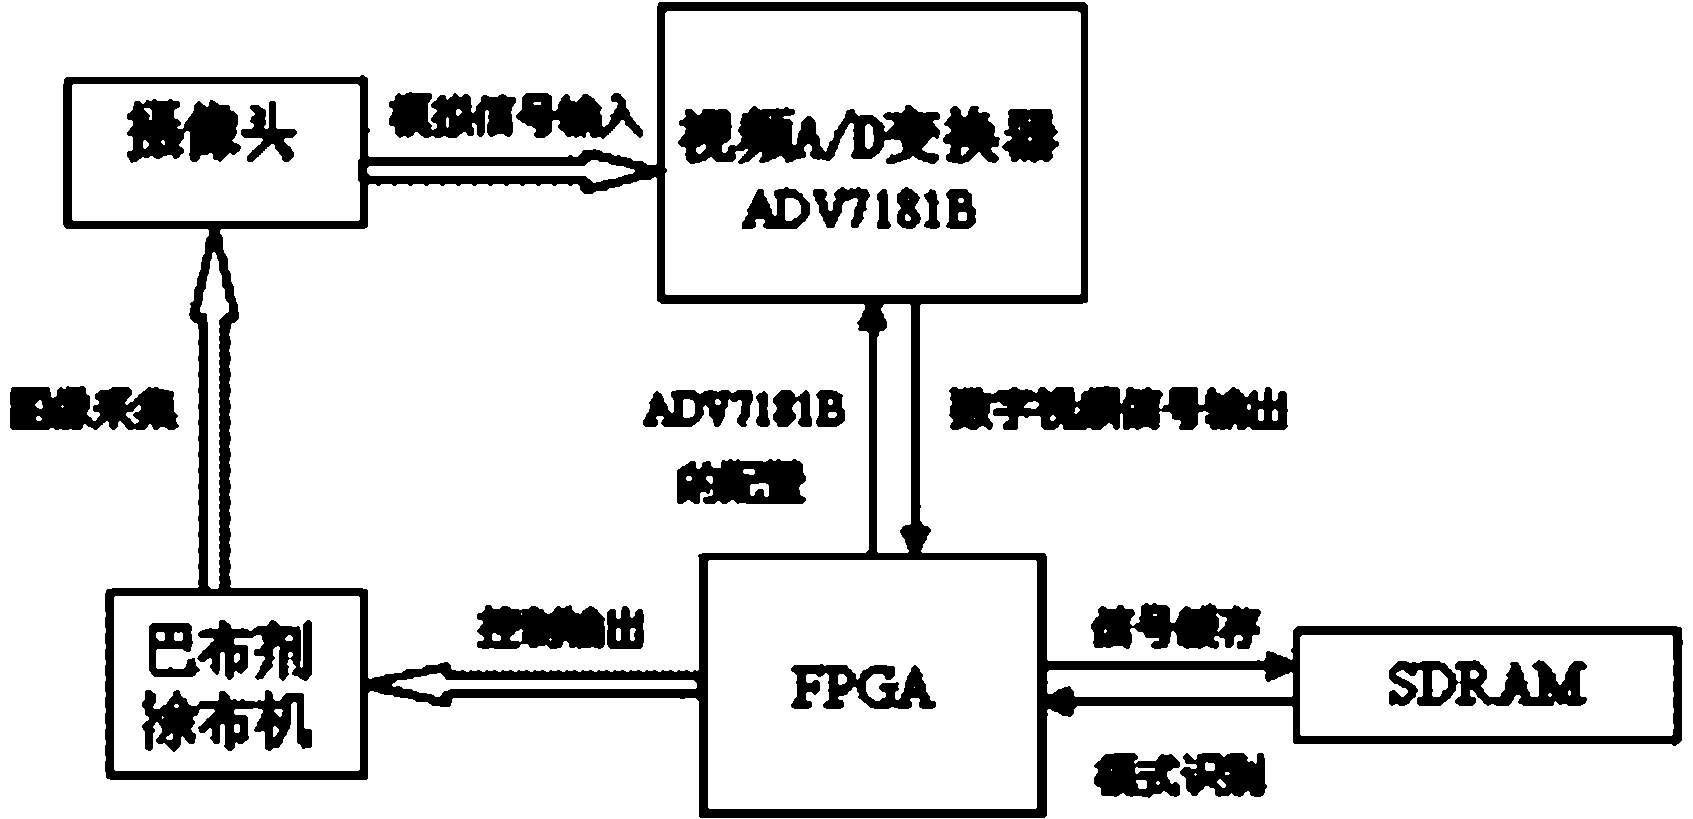 Automatic cataplasm coating control system based on FPGA (field programmable gate array) fuzzy pattern recognition